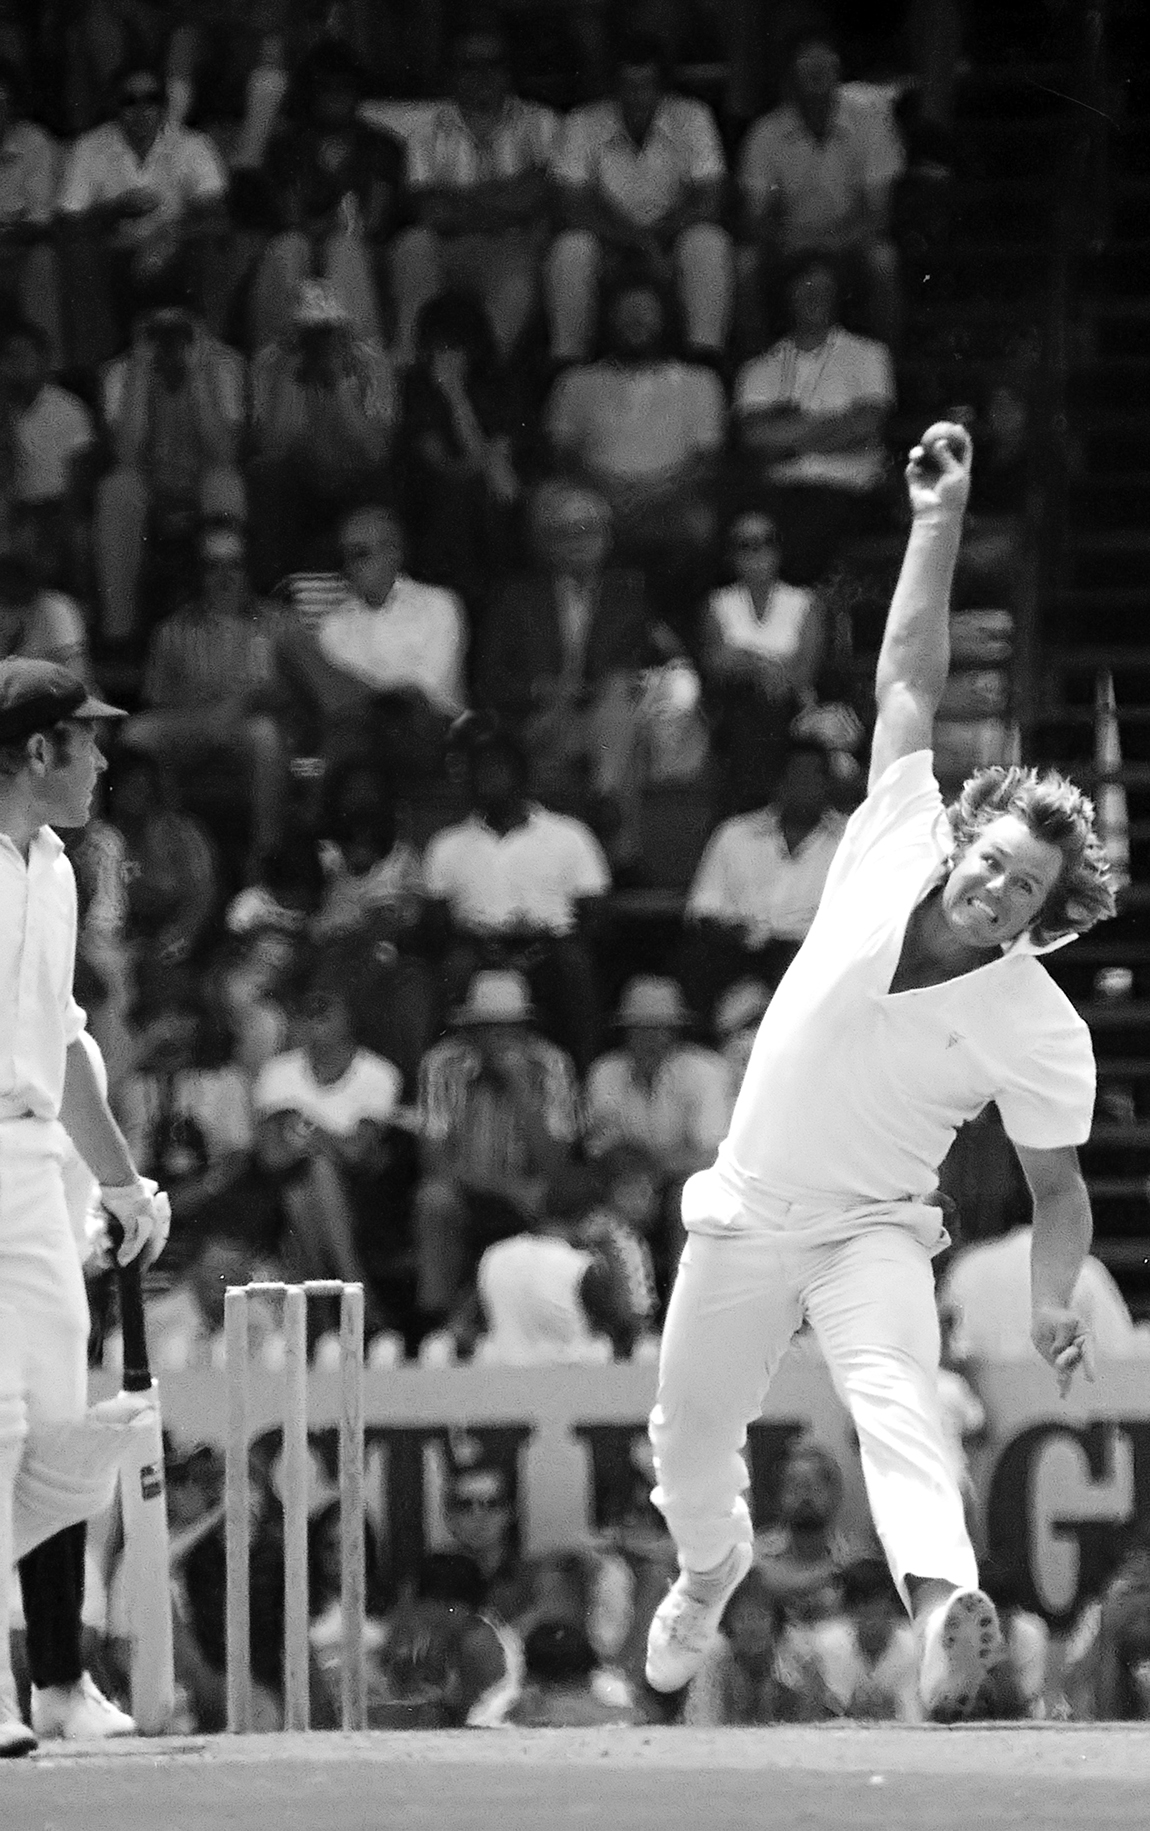 mike procter — a cricketing colossus who epitomised the best of the game